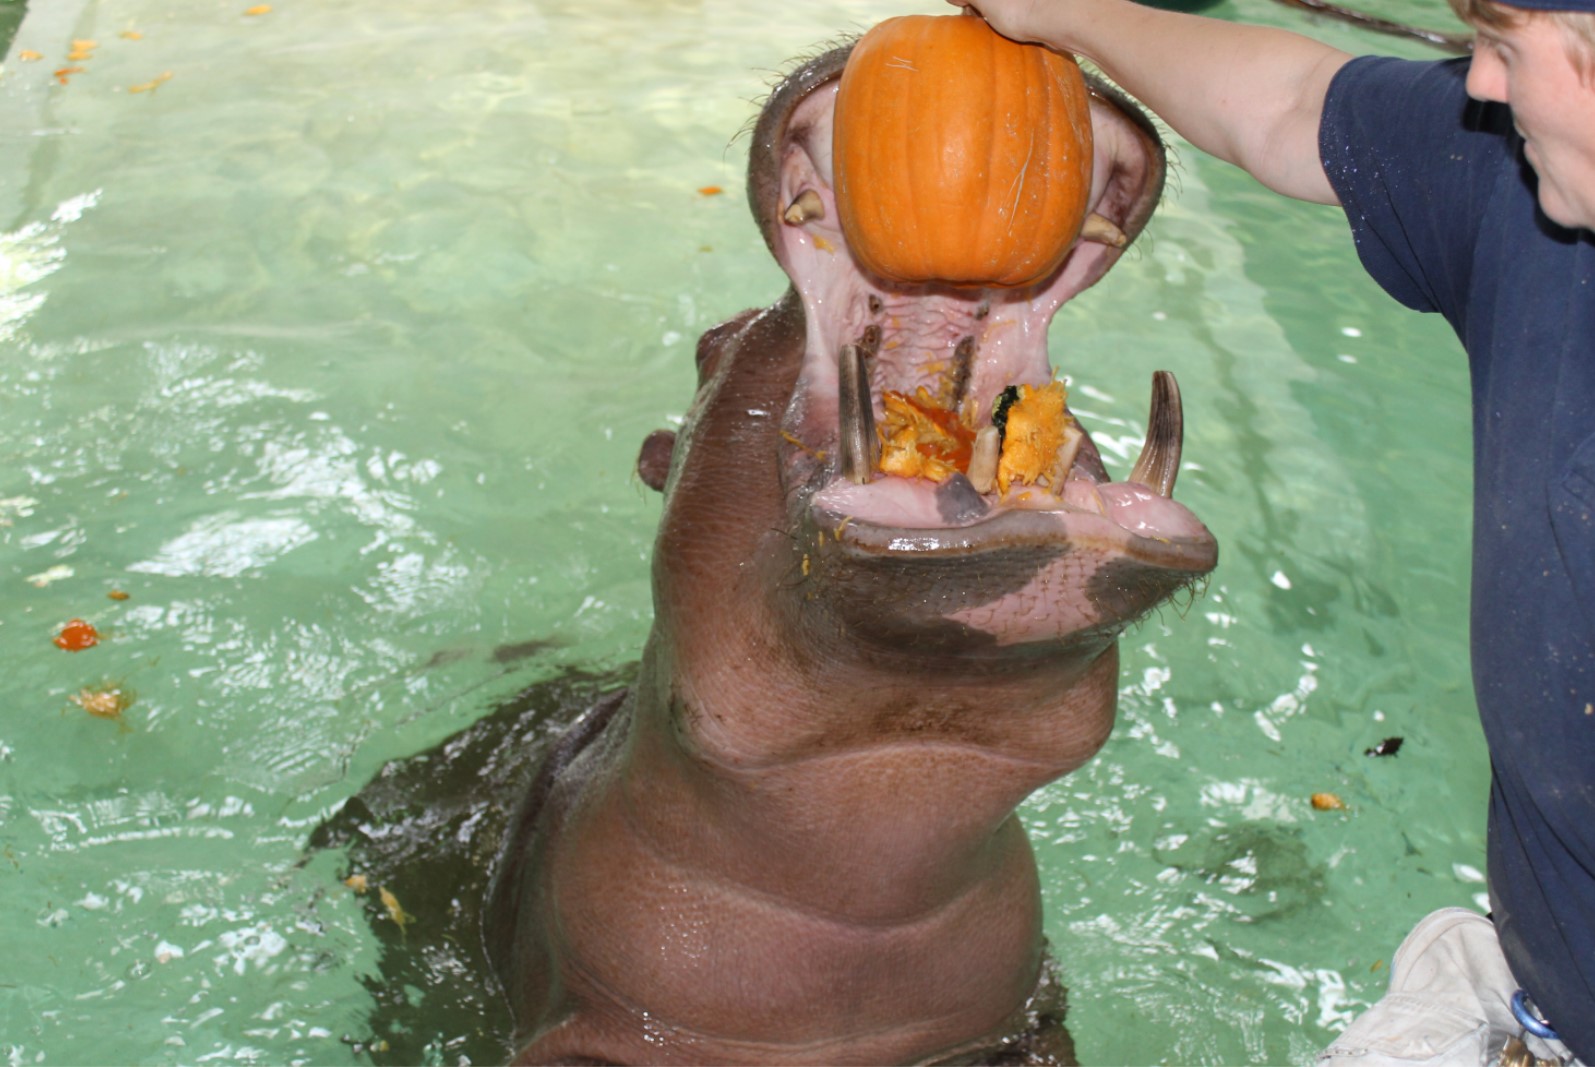 Vision the Hippopotamus was the first hippo born in Kansas in 2010.